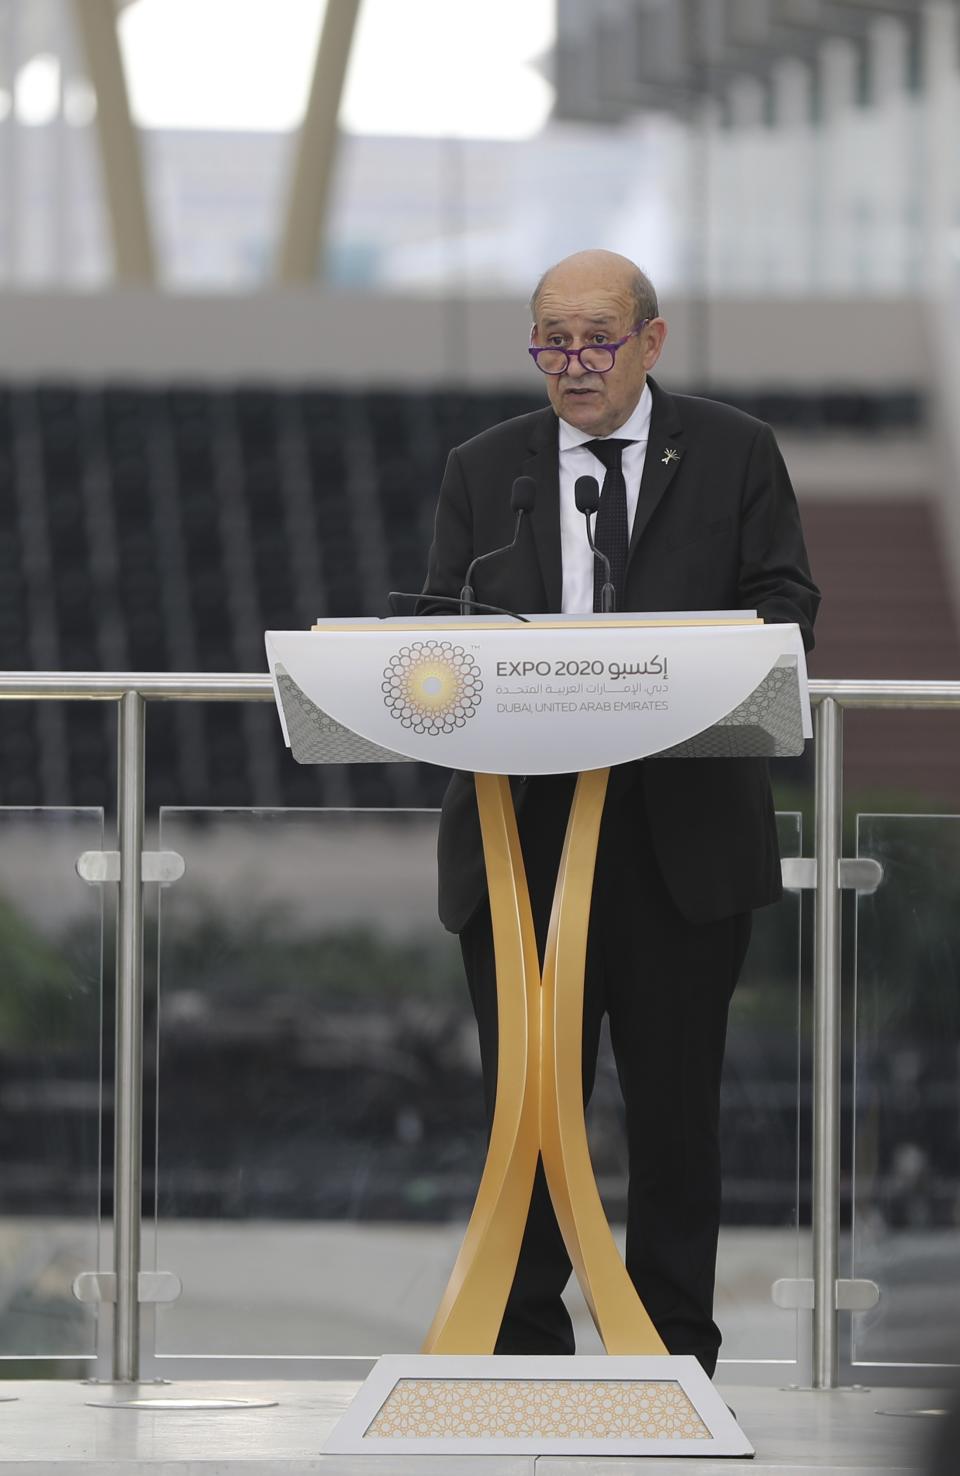 French Foreign Affairs Minister Jean-Yves Le Drian, talks during an official ceremony at Al Wasl Plaza of the Dubai Expo 2020 in Dubai, United Arab Emirates, Saturday, Oct, 2. 2021. (AP Photo/Kamran Jebreili)